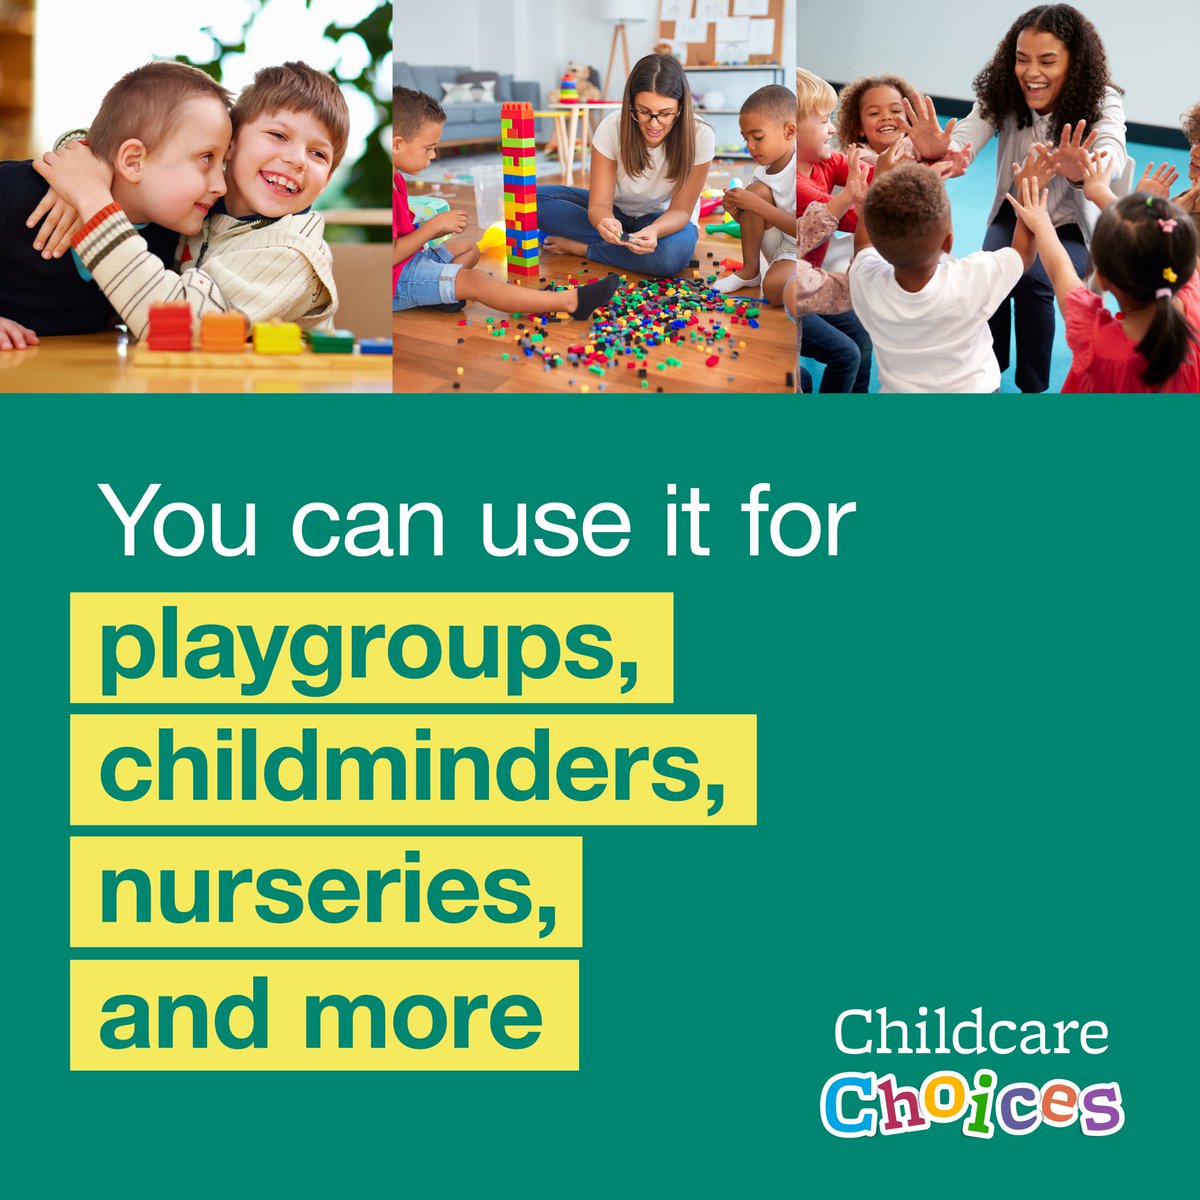 Get the help that fits your family. Government support with the cost of childcare could help you juggle your work and life commitments. Find out what you can apply for 👉 childcarechoices.gov.uk